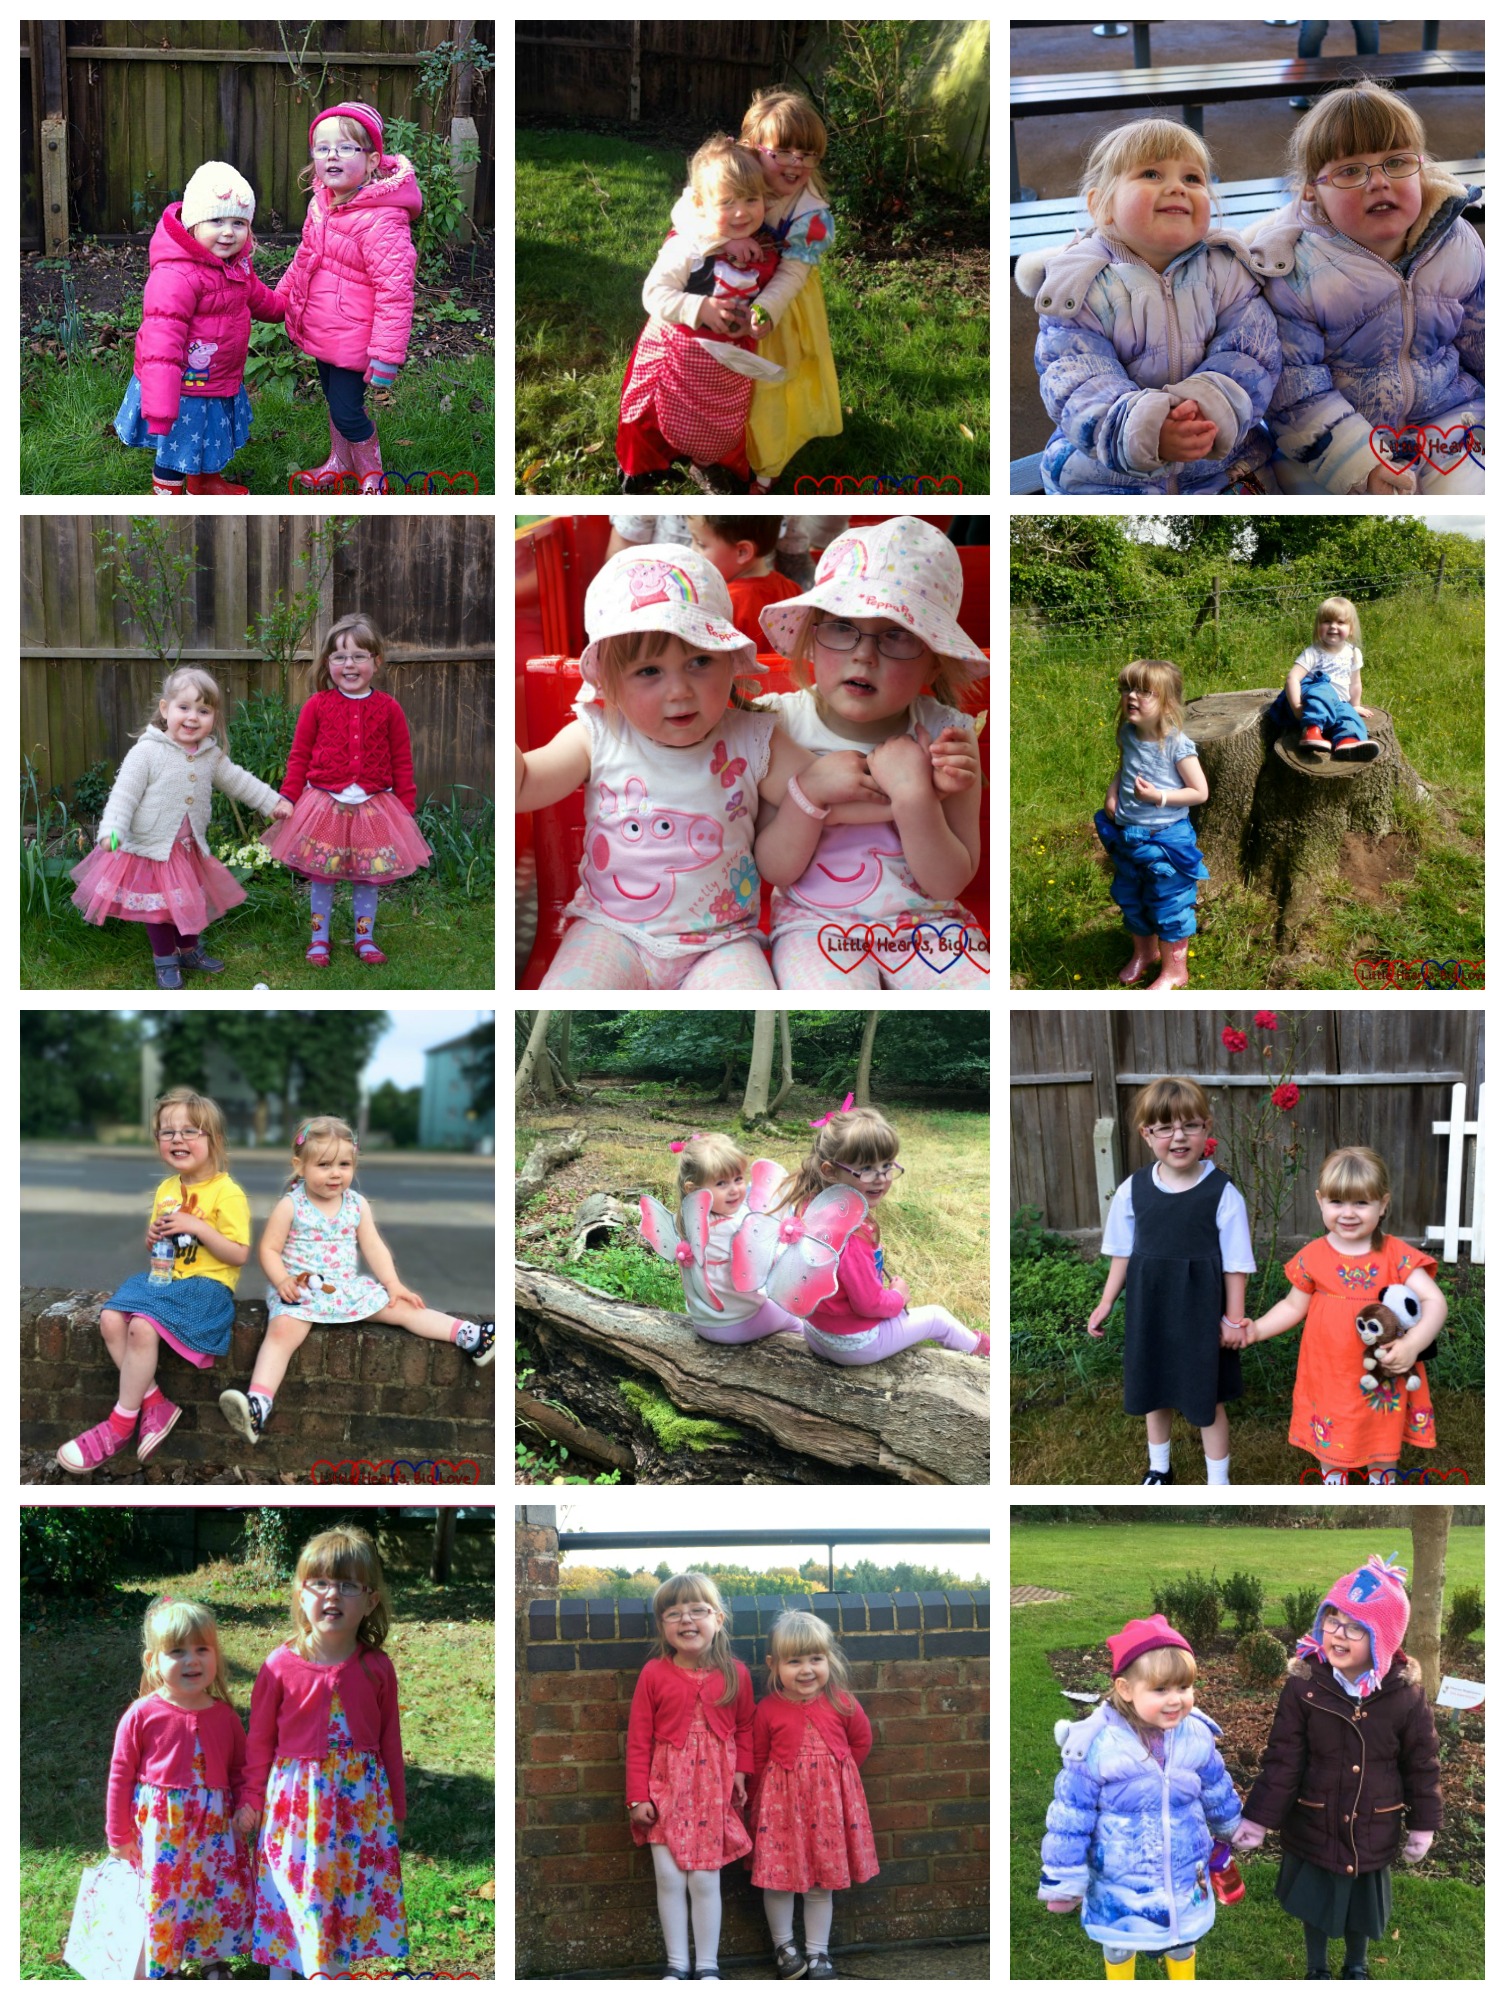 A collage of 12 photos - one from each month of the Siblings project for this year